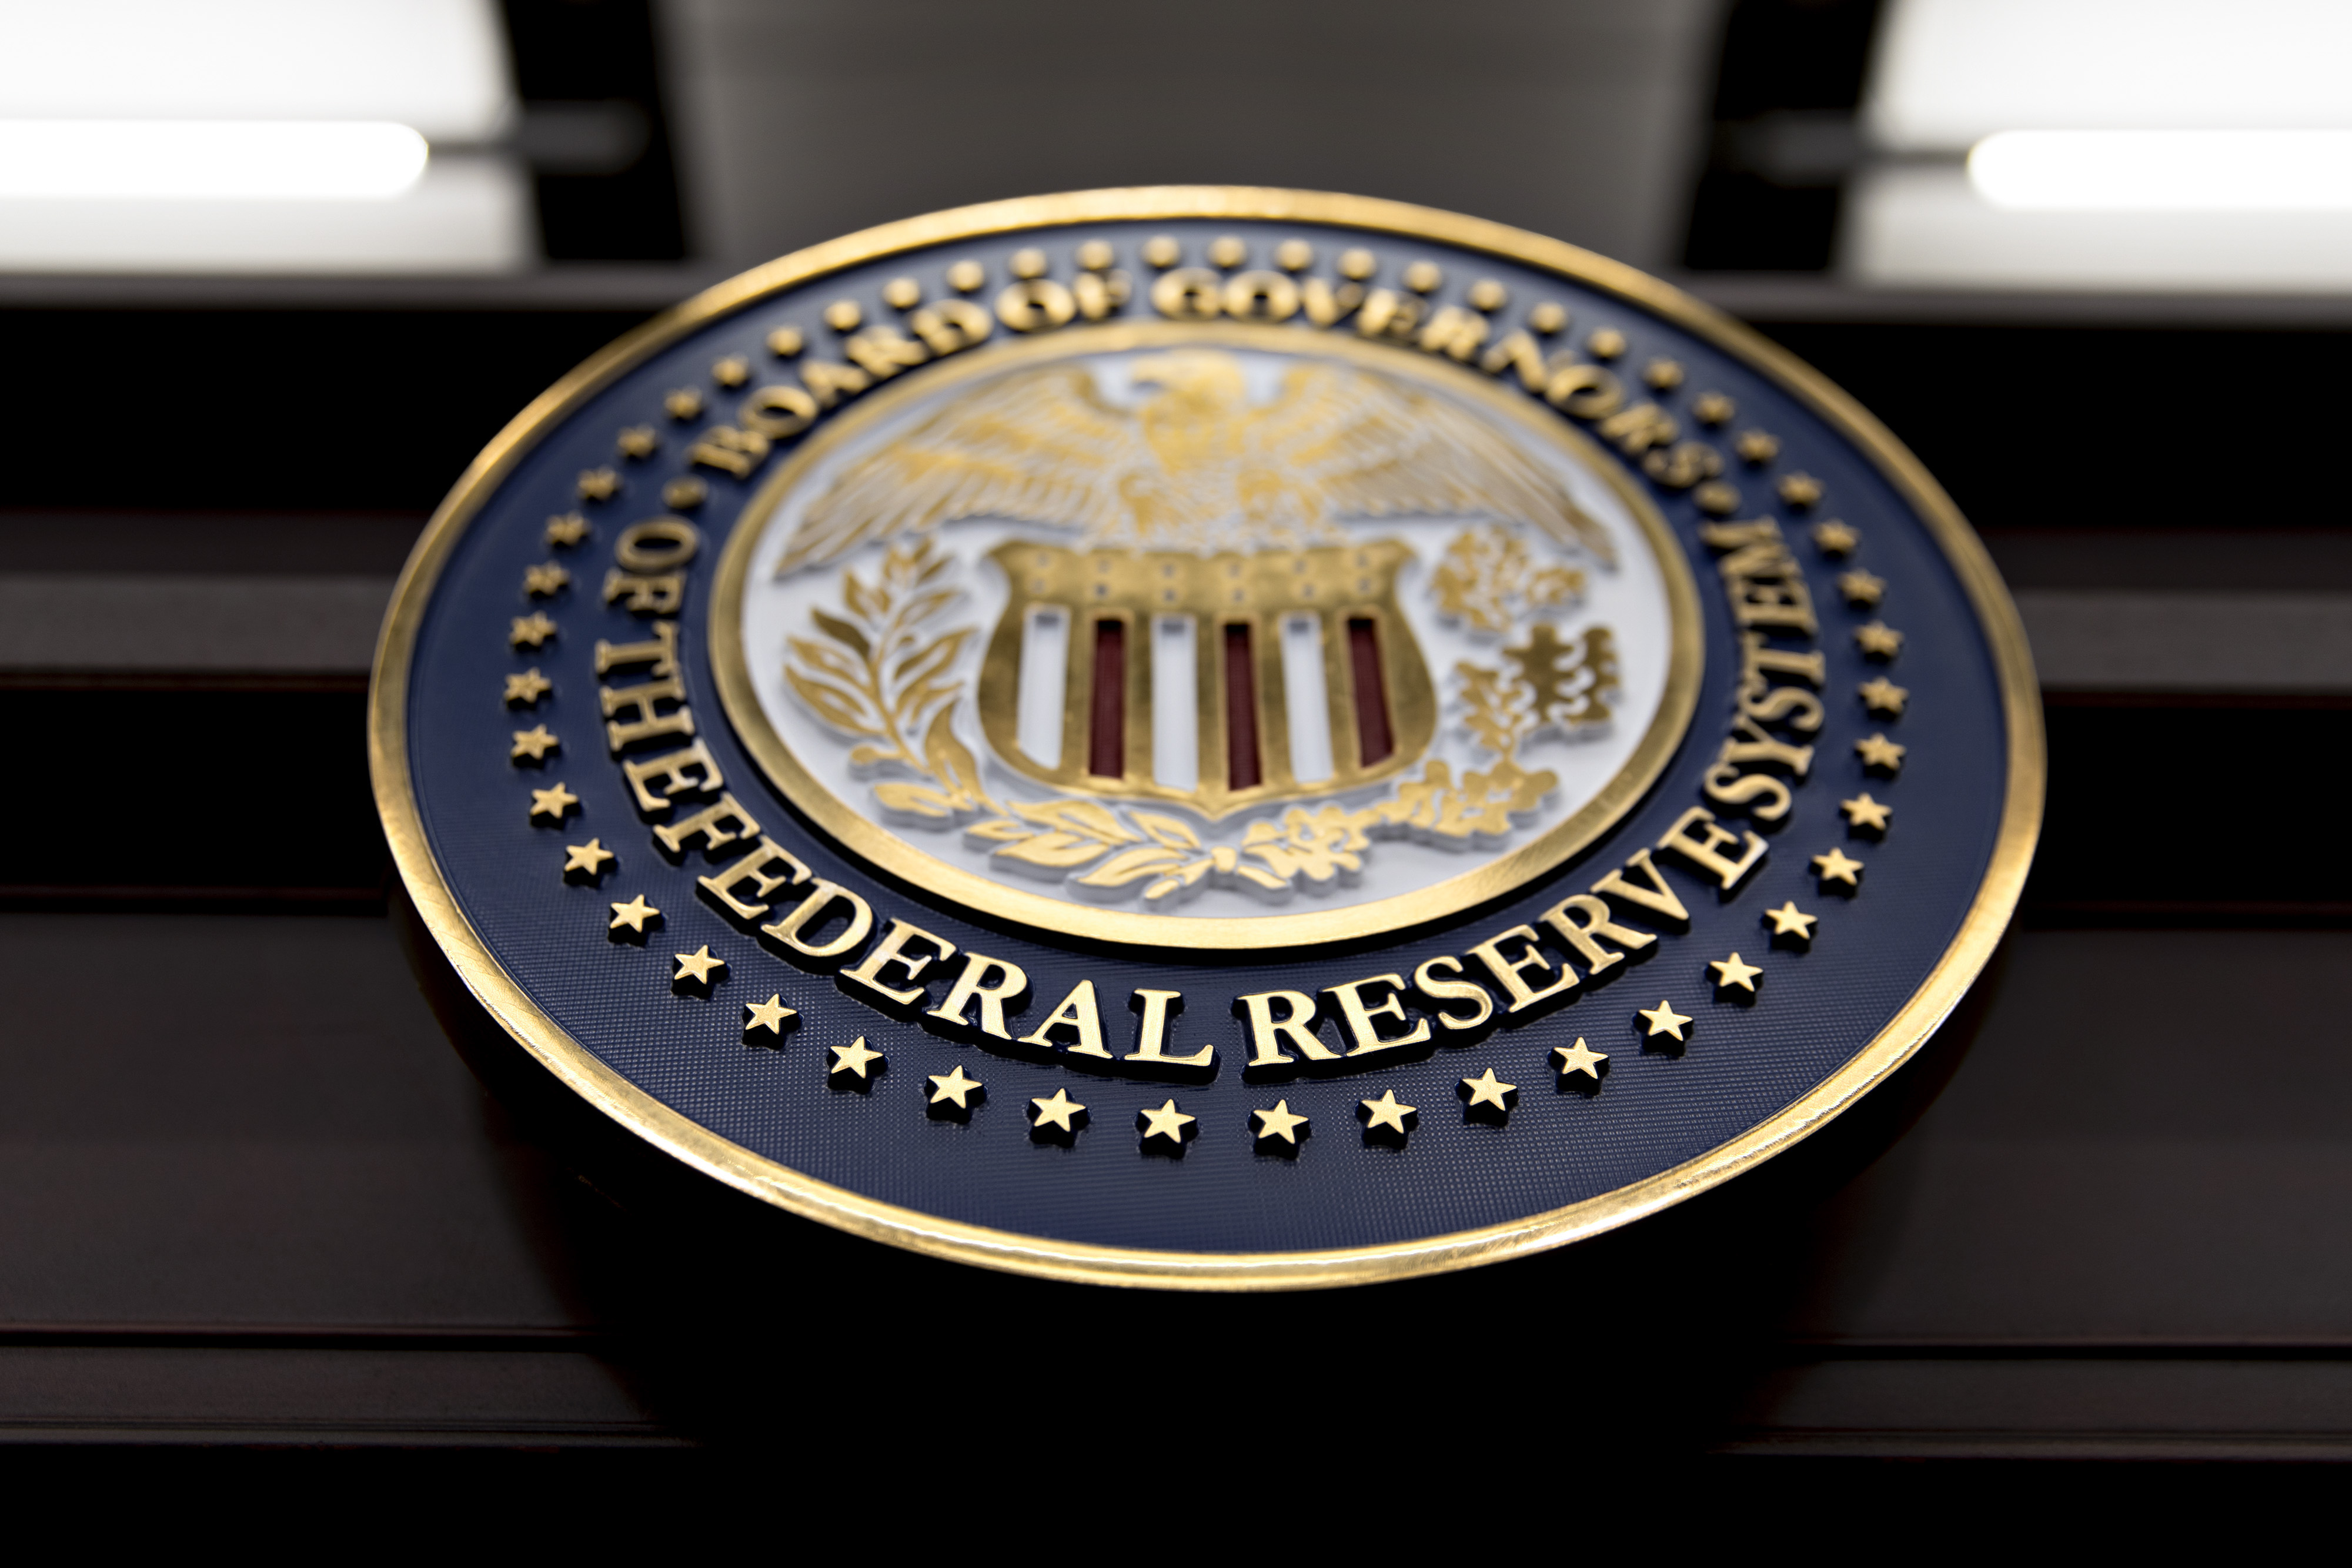 The seal of the Board of Governors of the Federal Reserve System hangs on a table before a news conference with Federal Reserve Chair Janet Yellen following a Federal Open Market Committee (FOMC) meeting in Washington, D.C., U.S., on Wednesday, Dec. 13, 2017. 